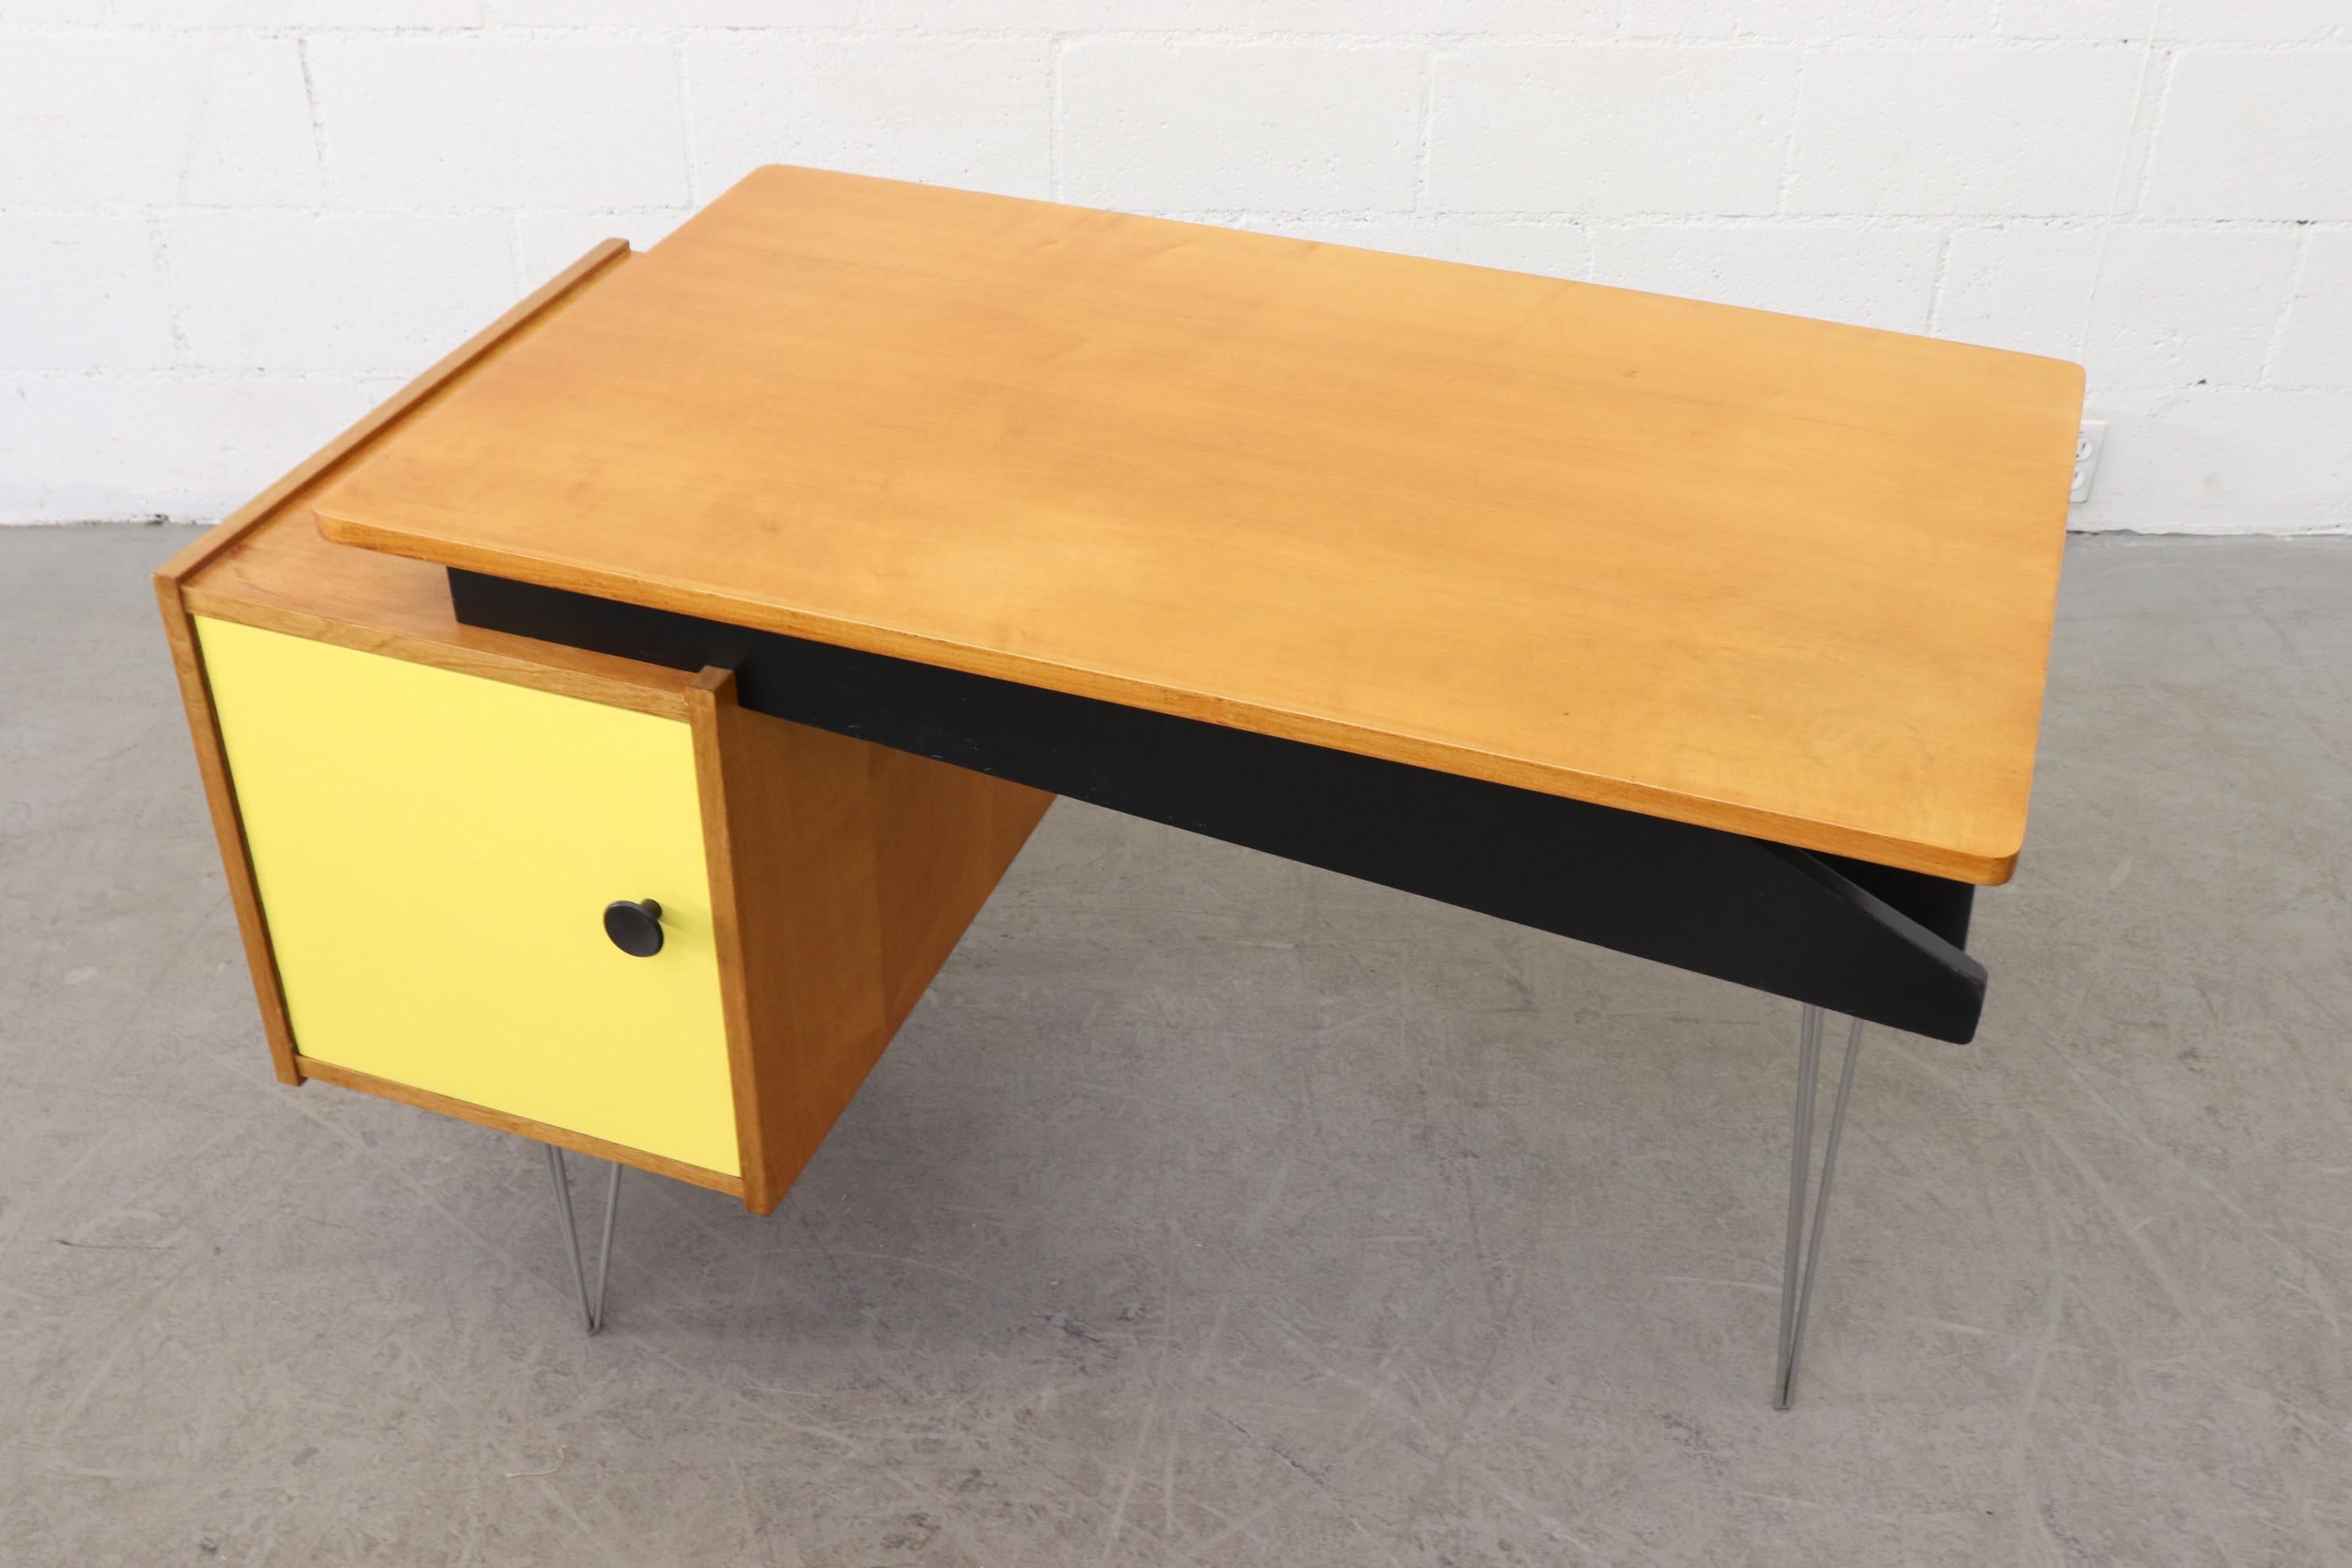 Cees Braakman desk for Pastoe with yellow cubby door and hairpin legs. Unique Asymmetric Design. Lightly refinished. Pull out shelf. In original condition with visible signs of wear consistent with age and use.

Comes with removable small black